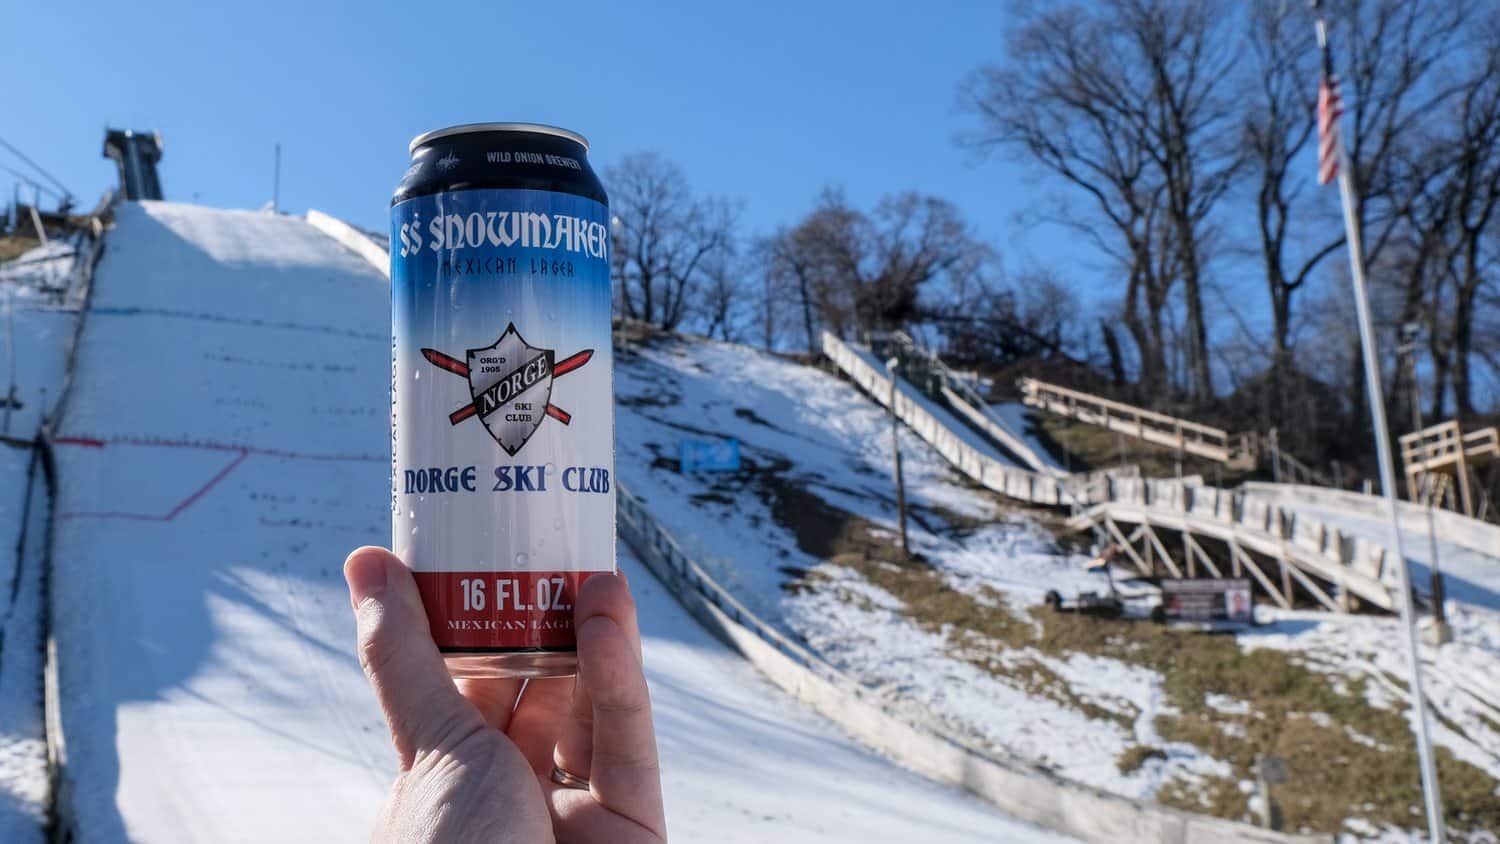 Special edition SS Snowmaker from Wild Onion Brewery at the 118th annual Norge Ski Club, winter tournament, 2023.